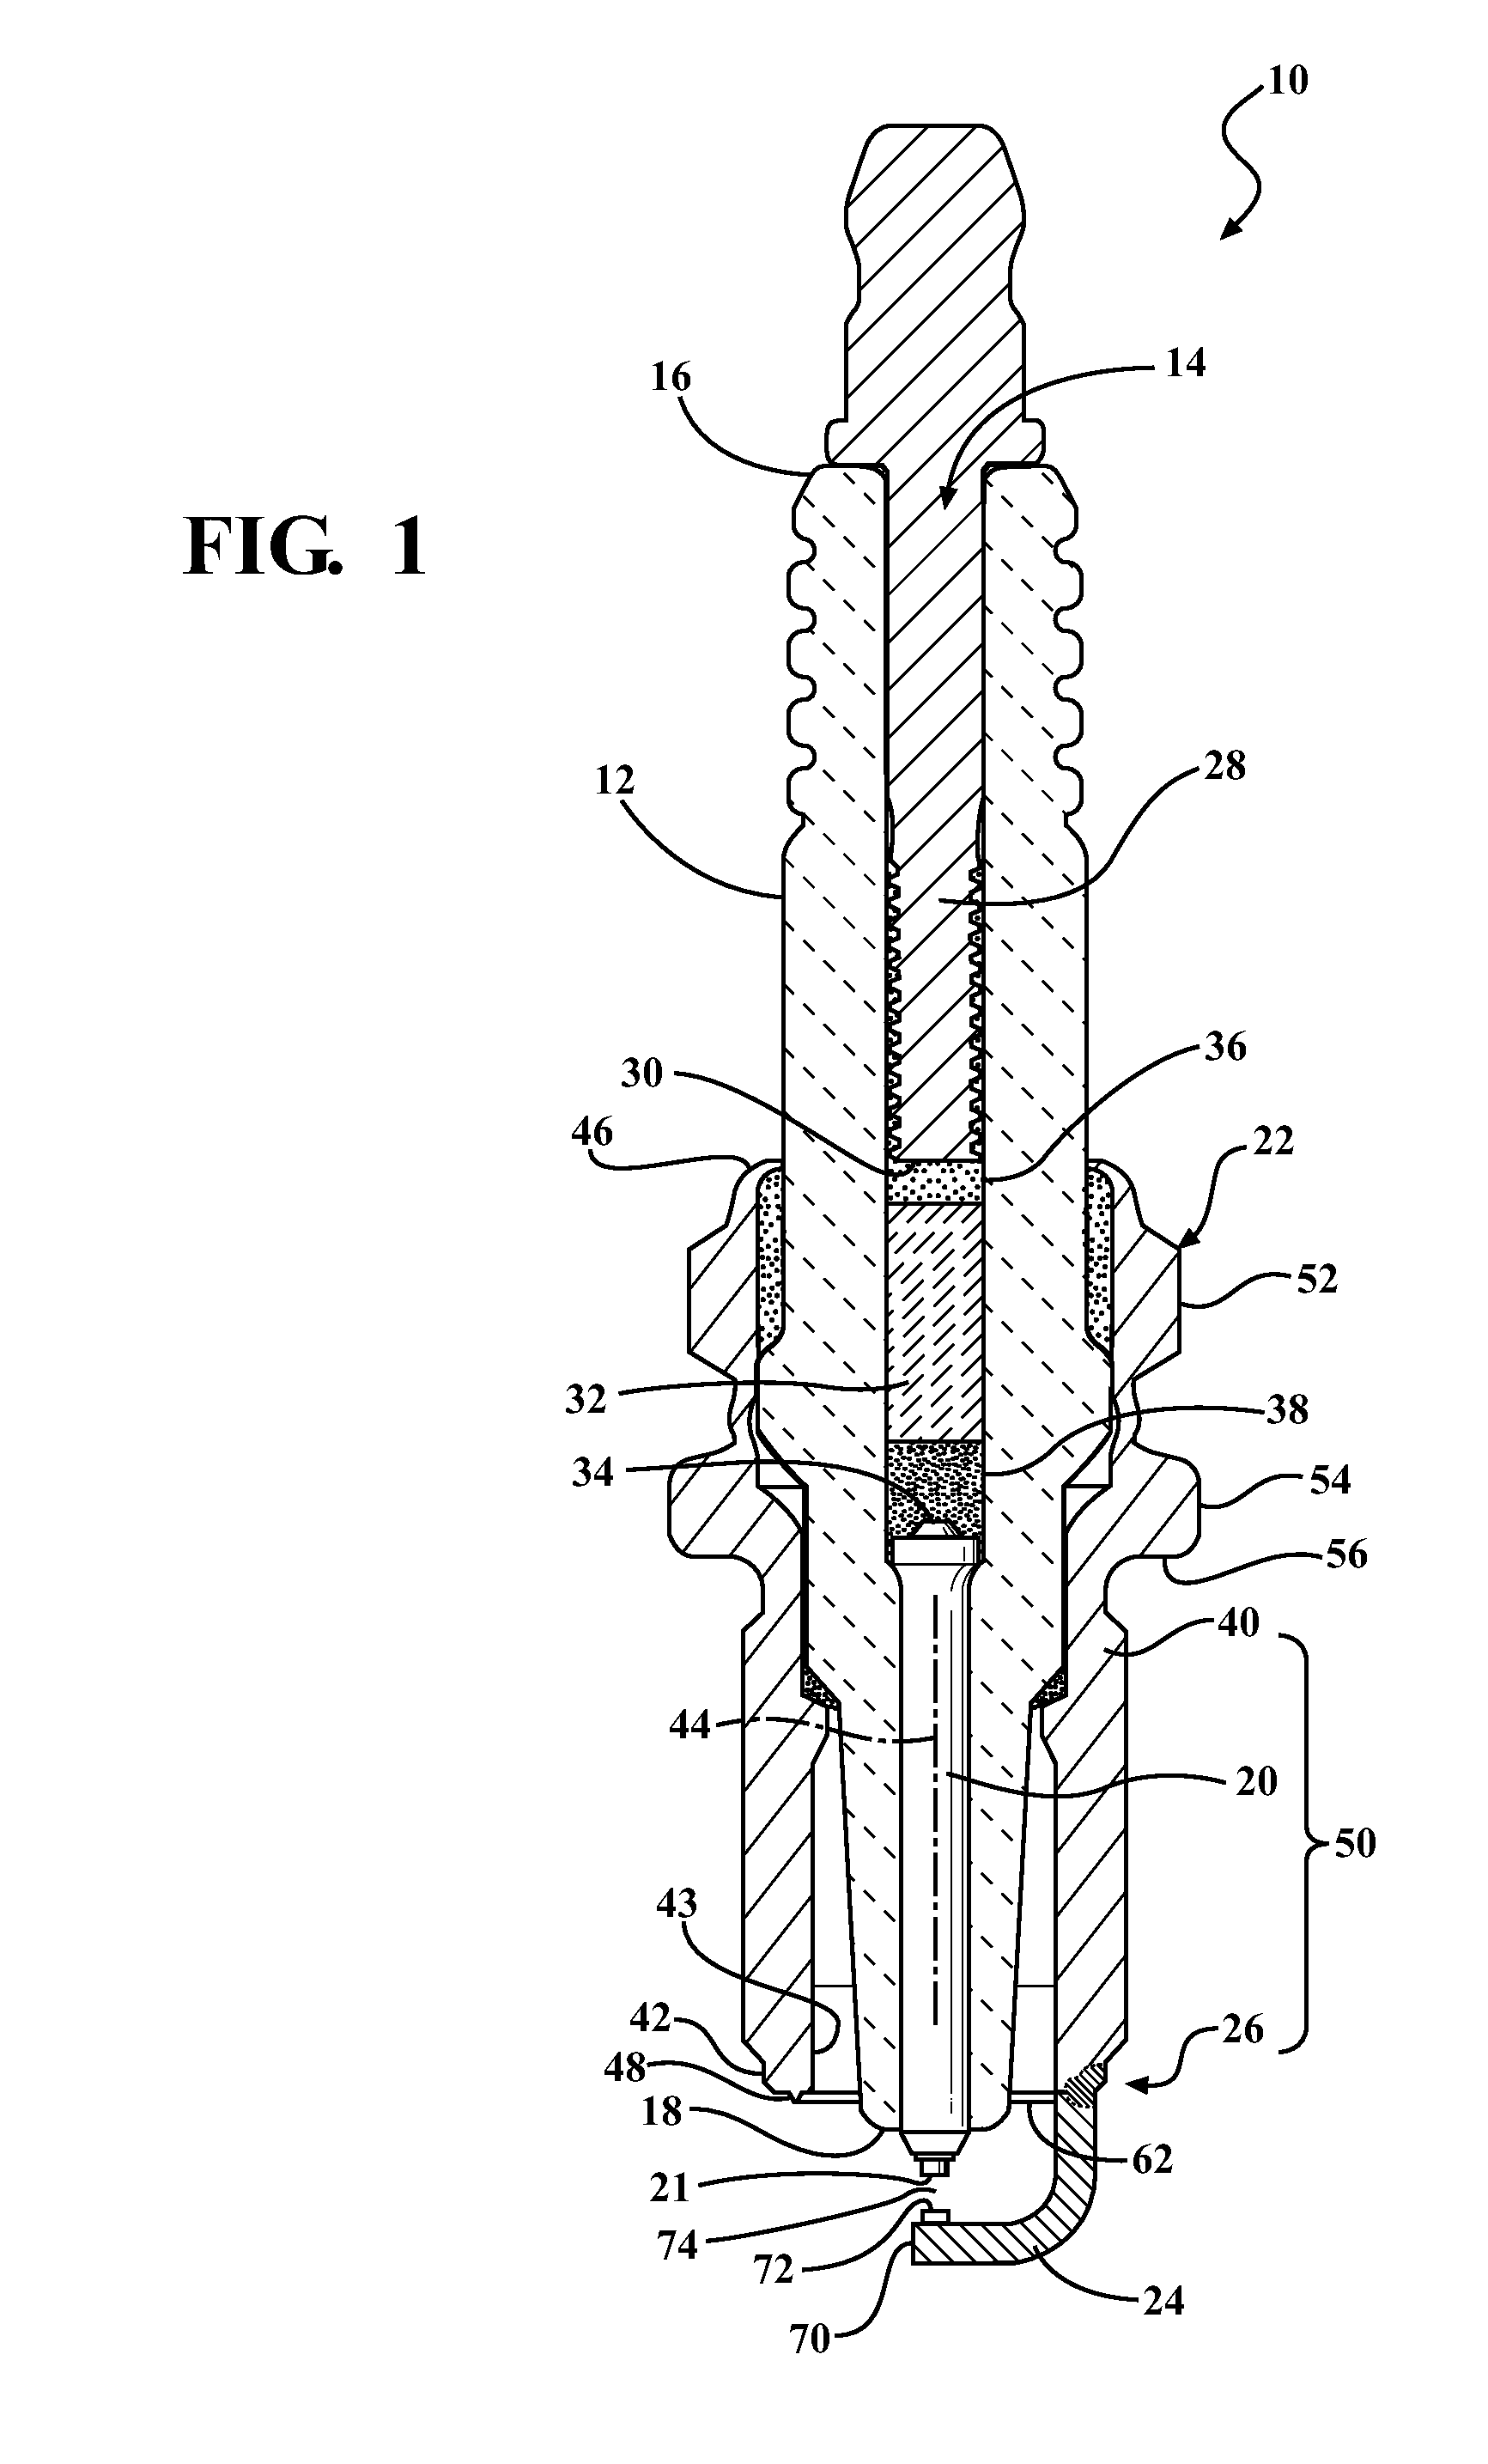 Spark ignition device for an internal combustion engine, metal shell therefor and methods of construction thereof